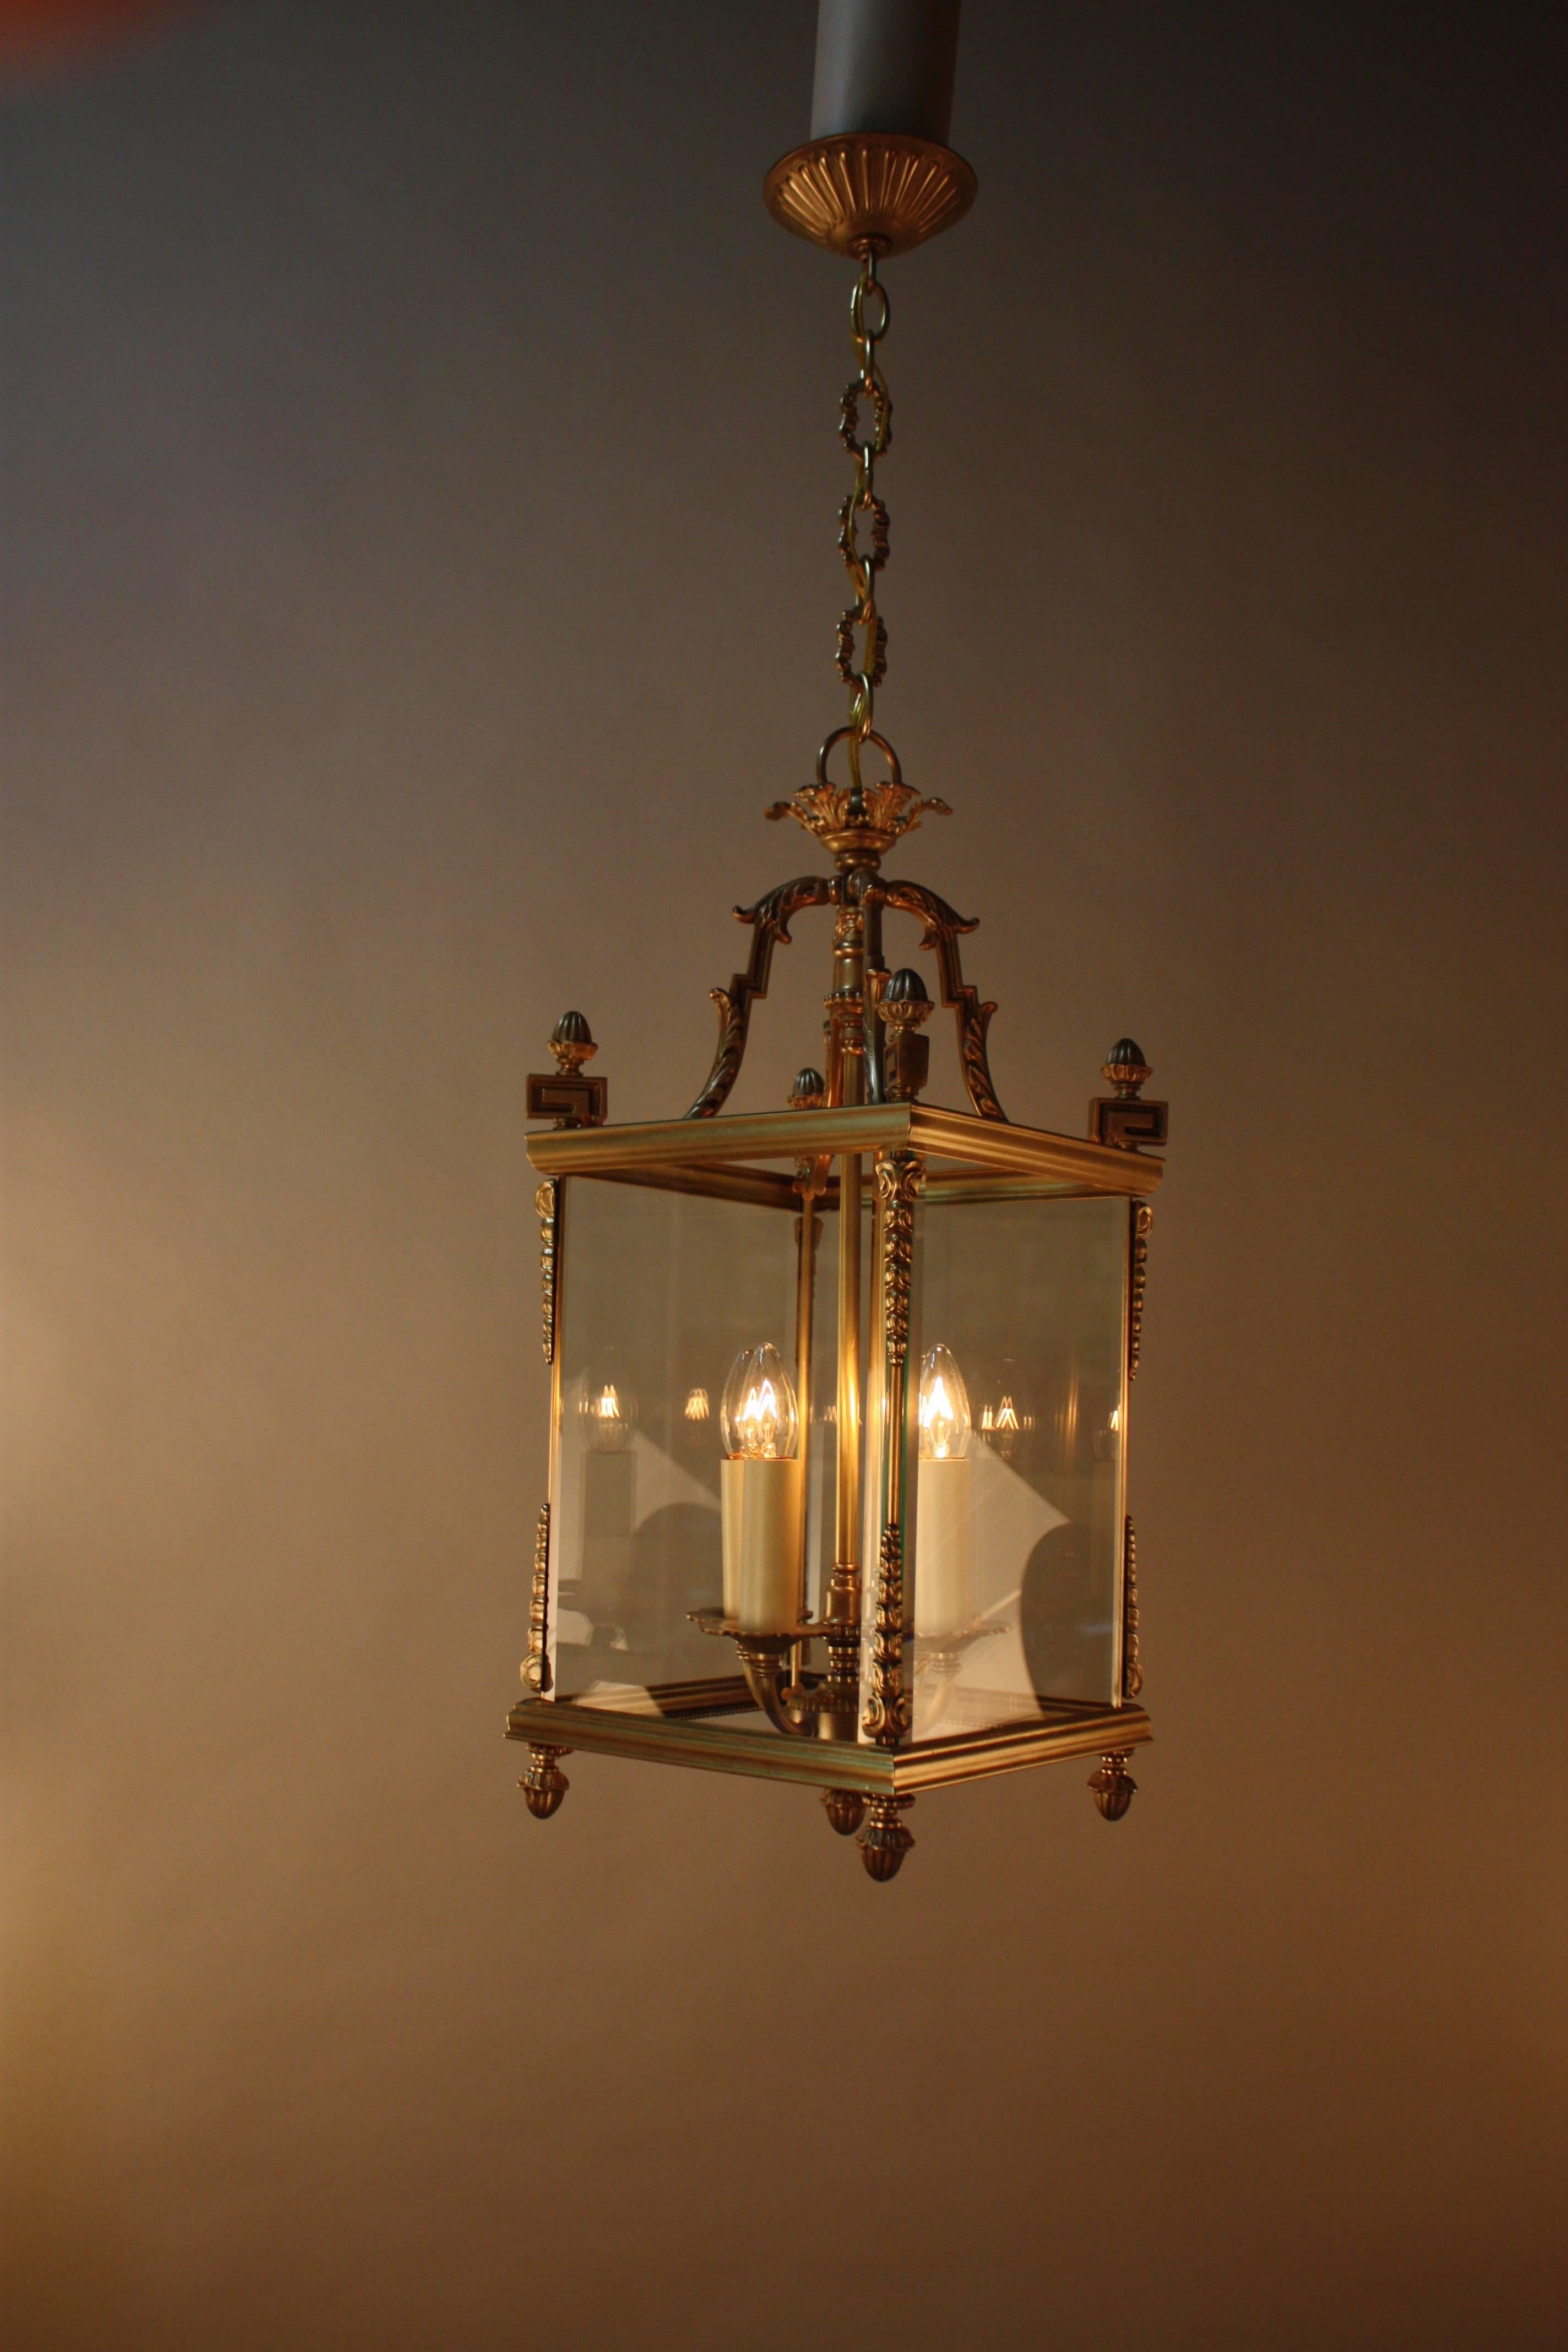 Elegant pair of four-light square bronze lanterns with beveled glass panels.
Fully installed with one link of chain and canopy is 32